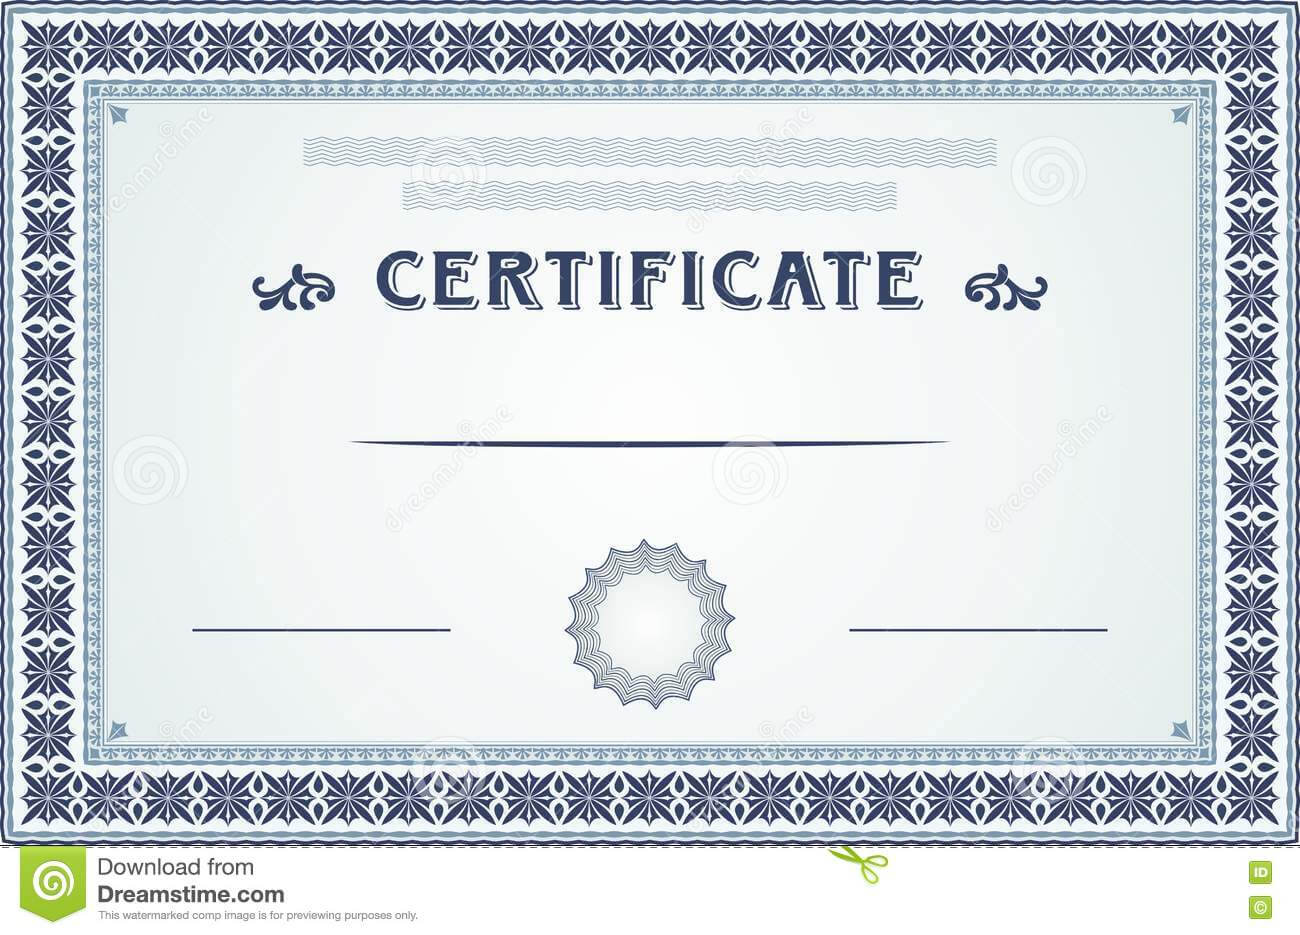 Certificate Border And Template Design Stock Vector Within Certificate Border Design Templates